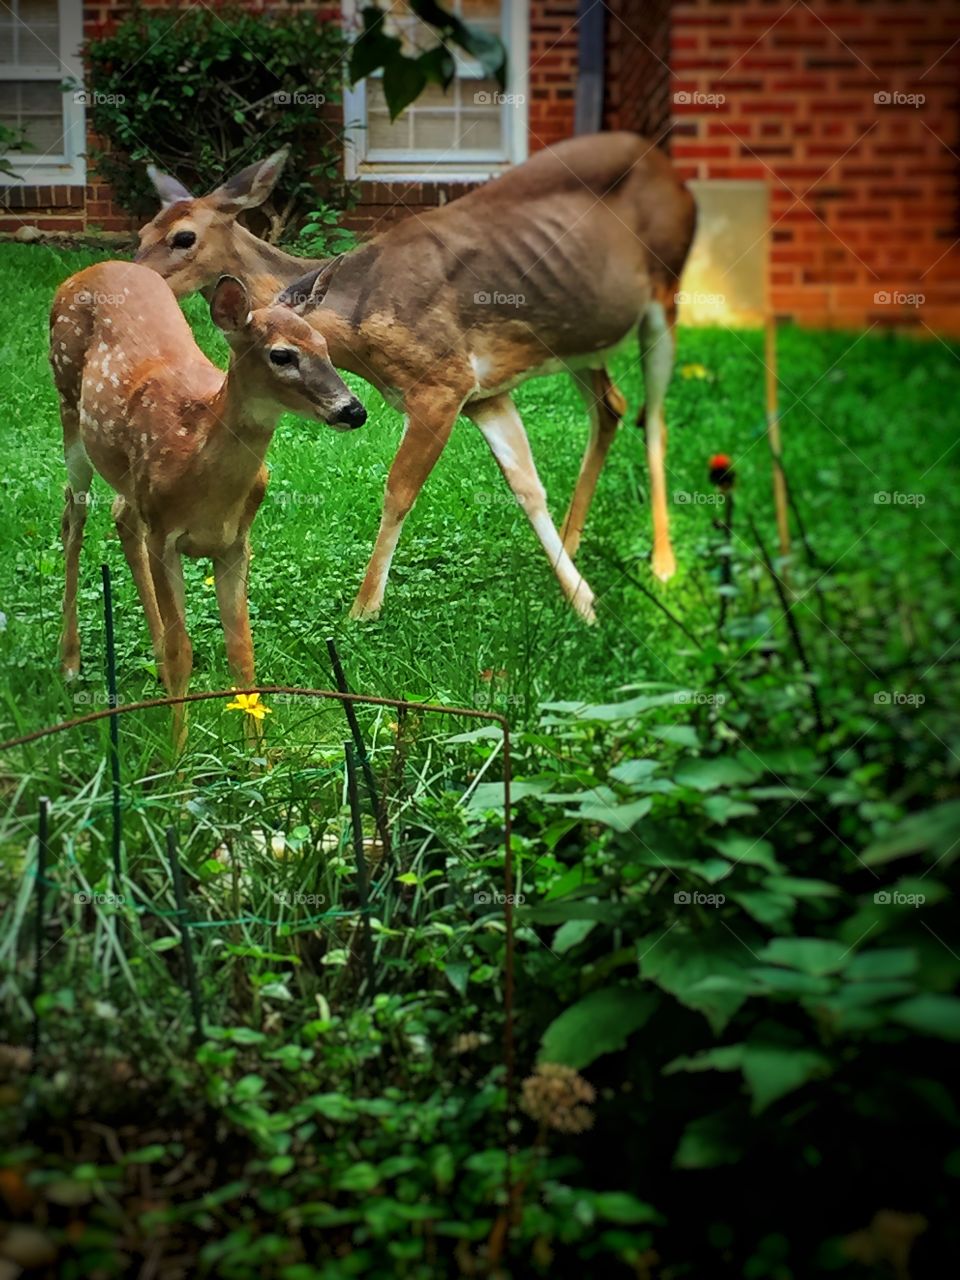 Two young deer exploring a garden with thick green grass and plants. 